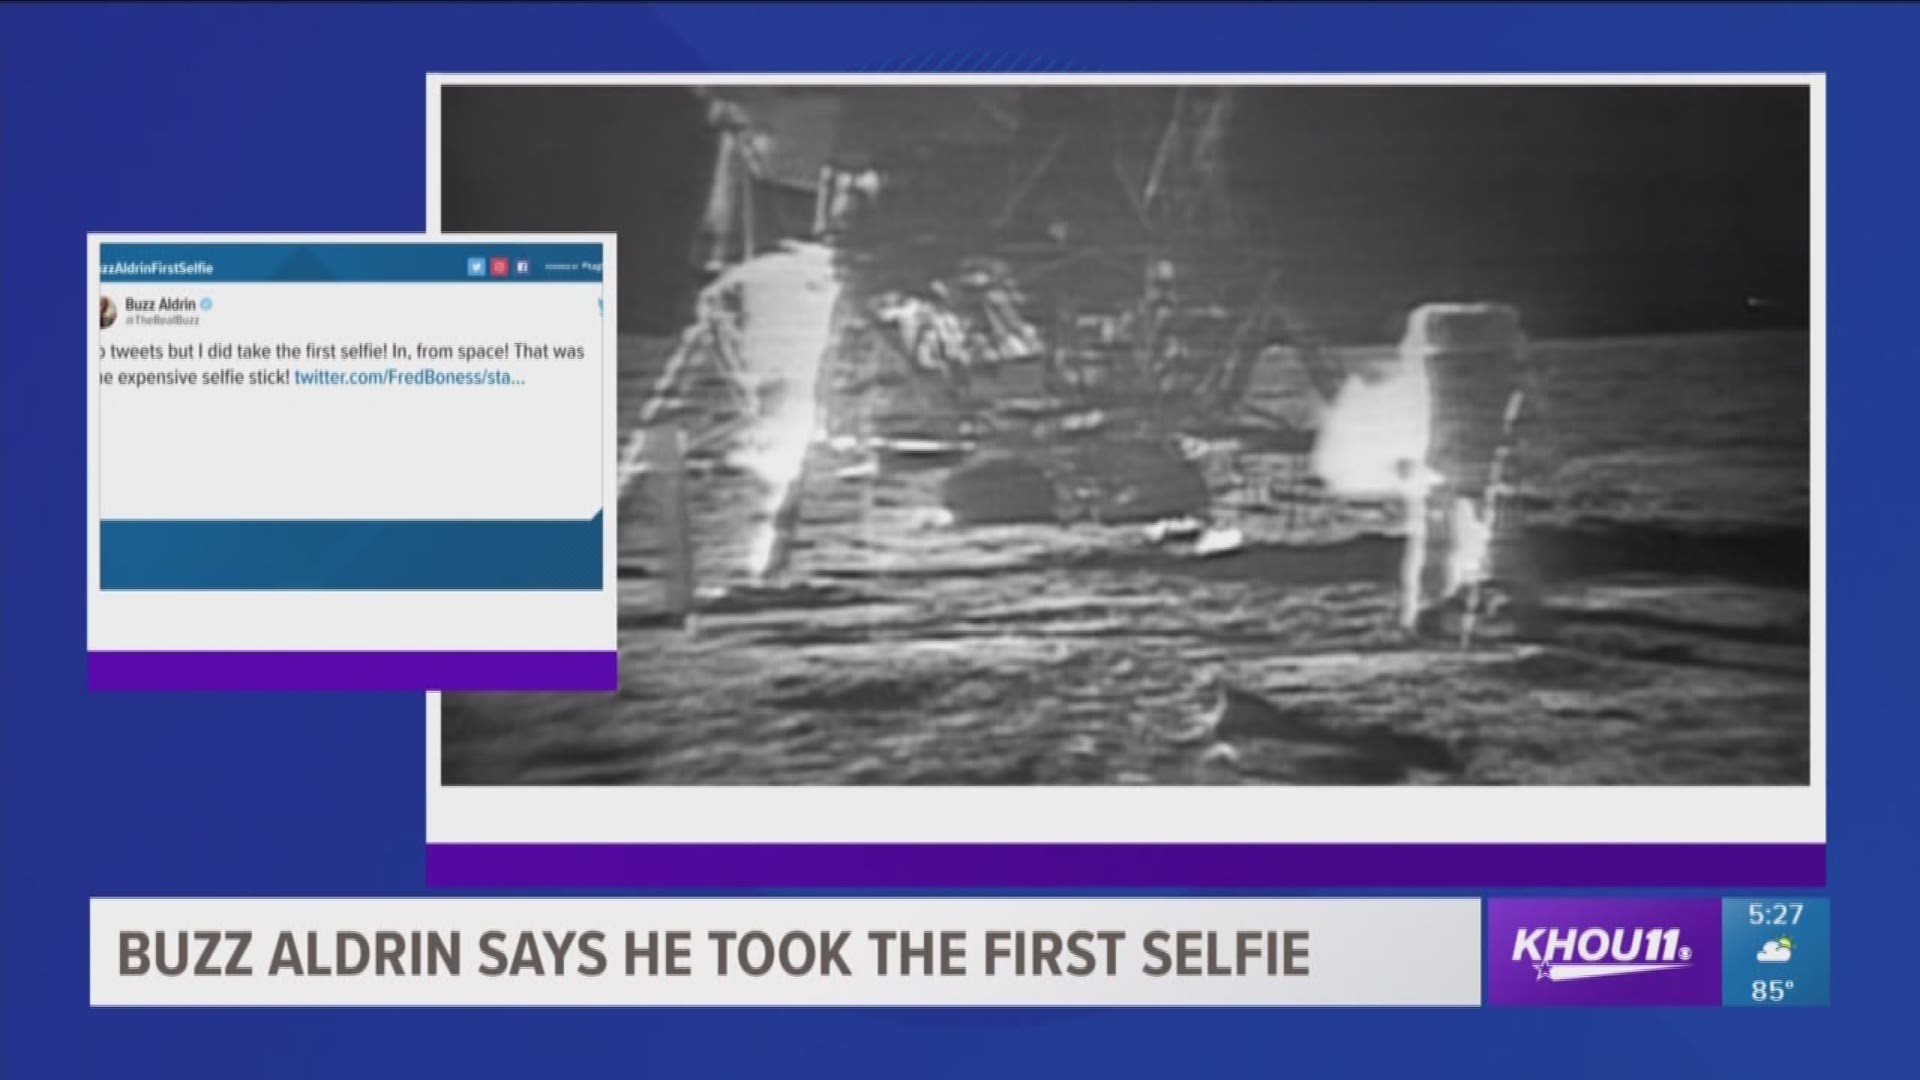 In light of National Selfie Day, former astronaut Buzz Aldrin says he took first one